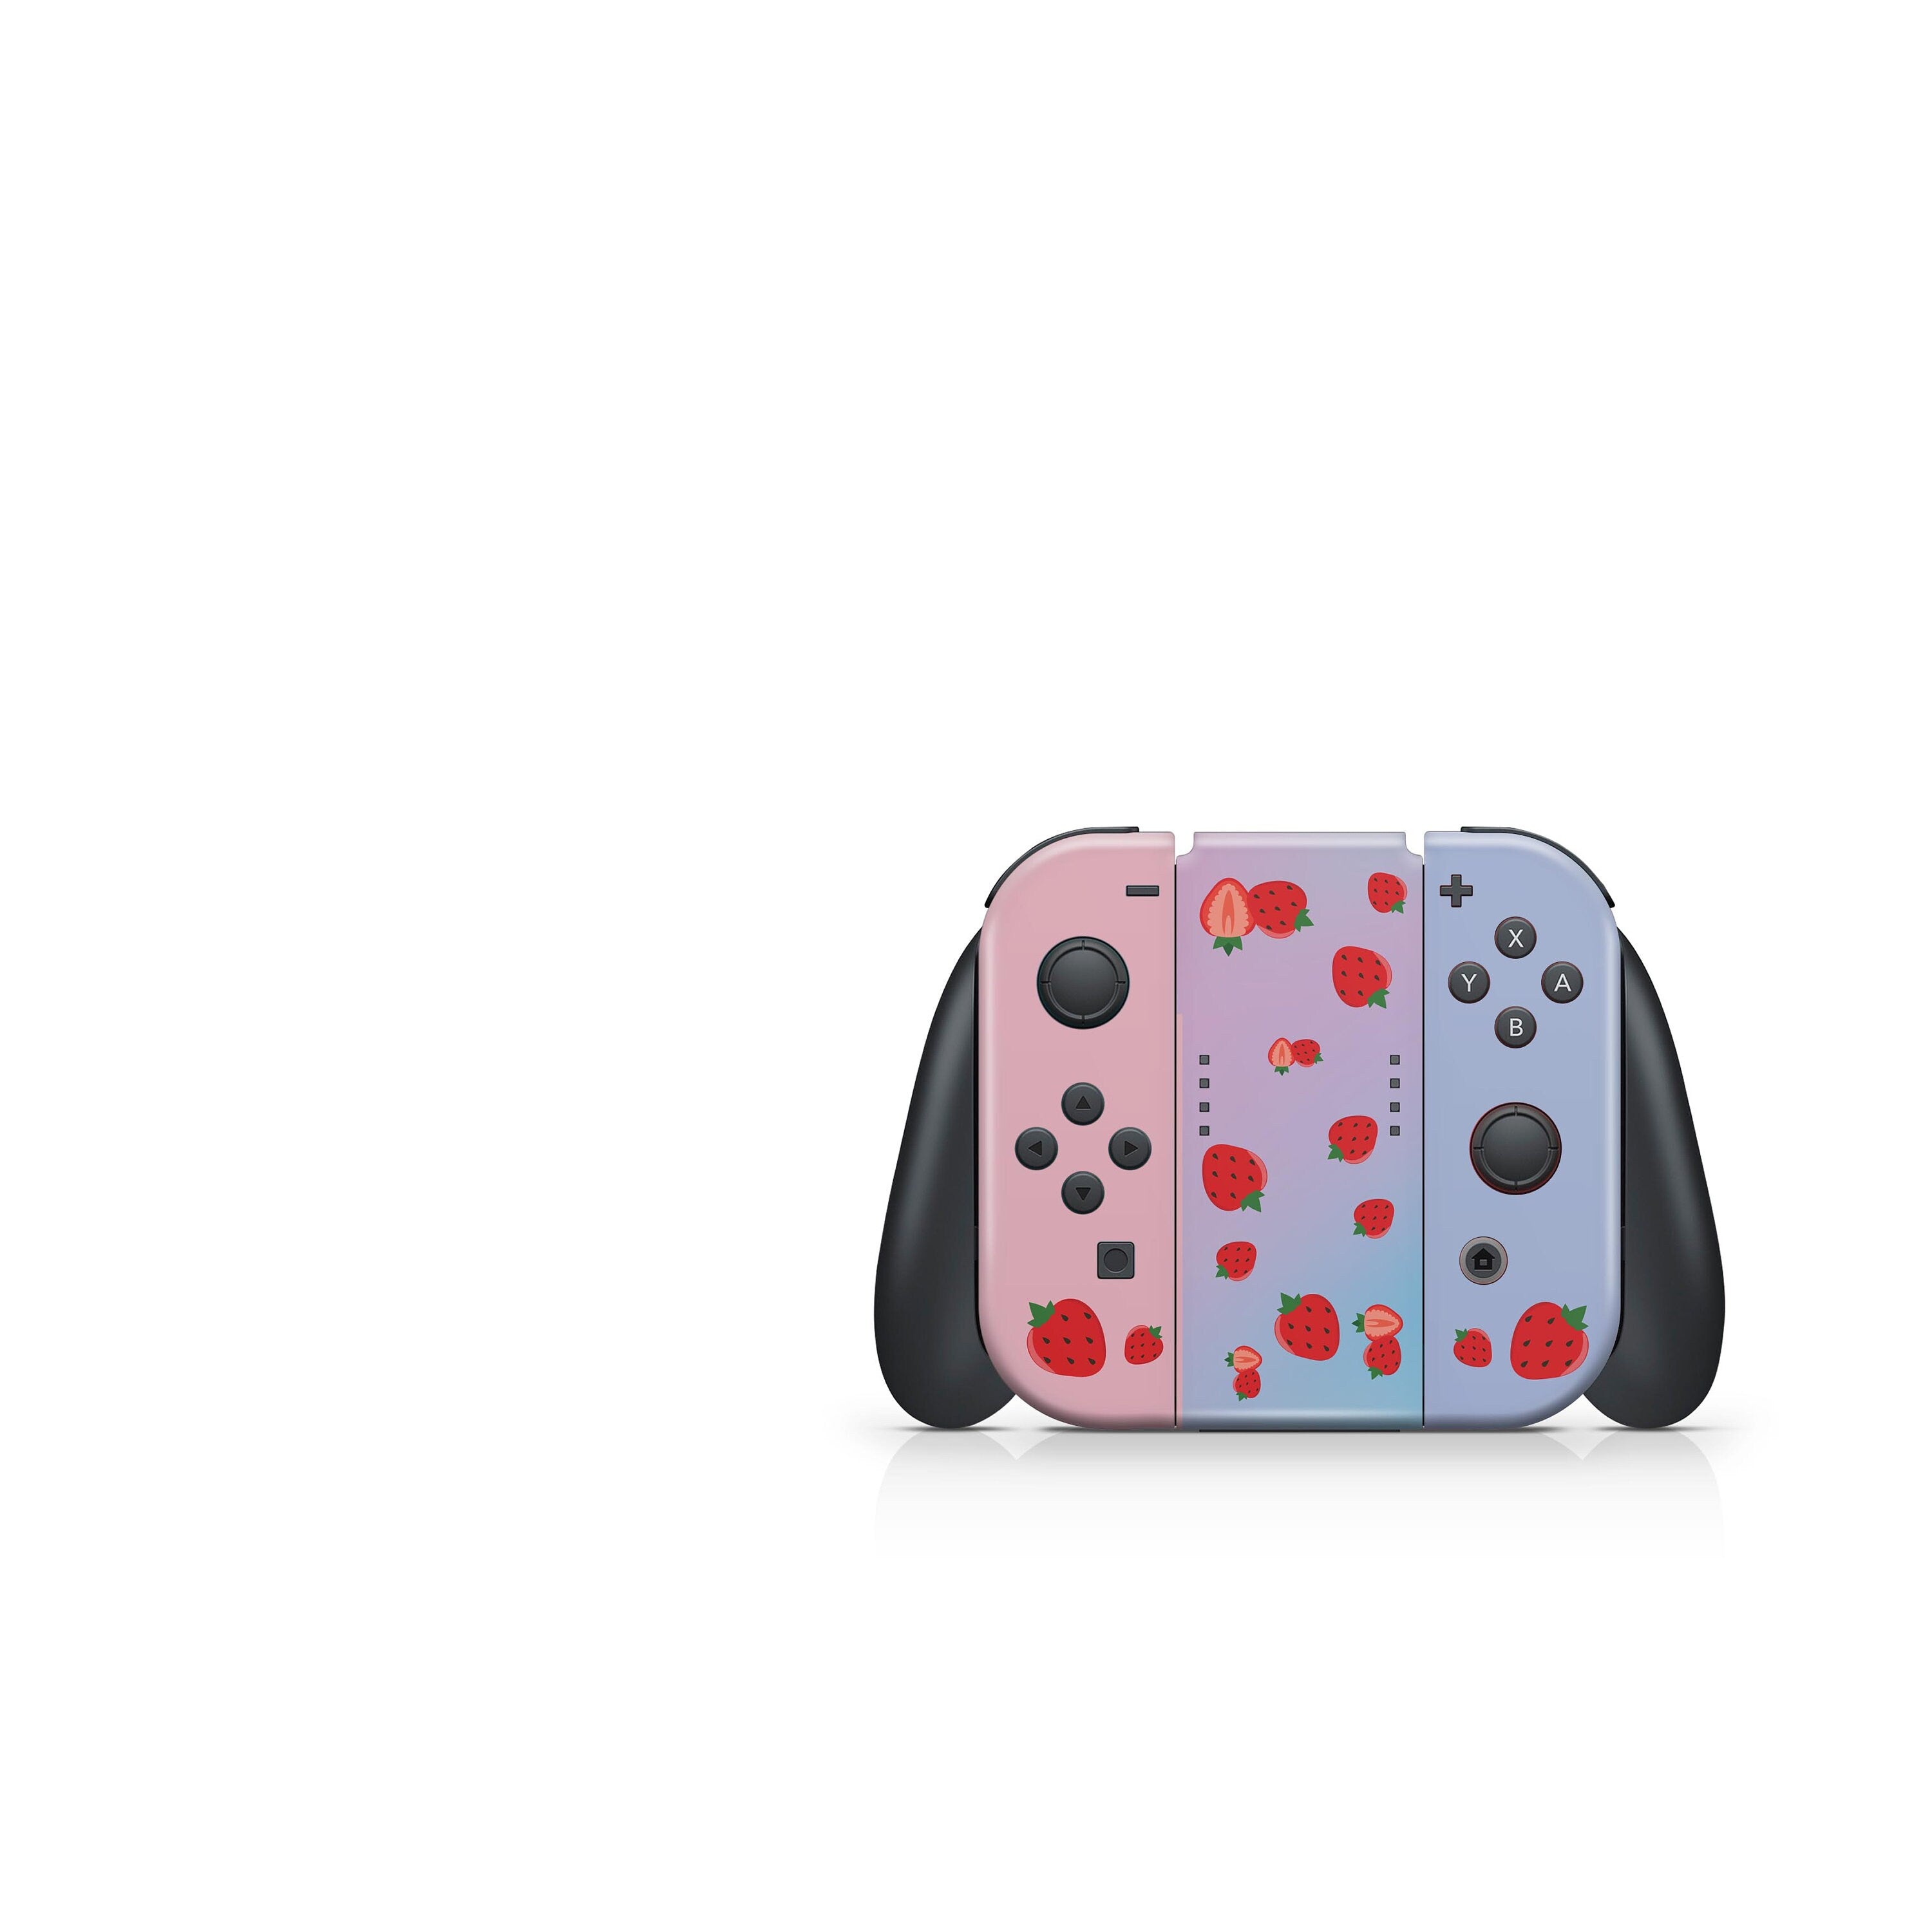 Nintendo Switches skin Cute strawberry, Pink blue switch skin Full cover 3m